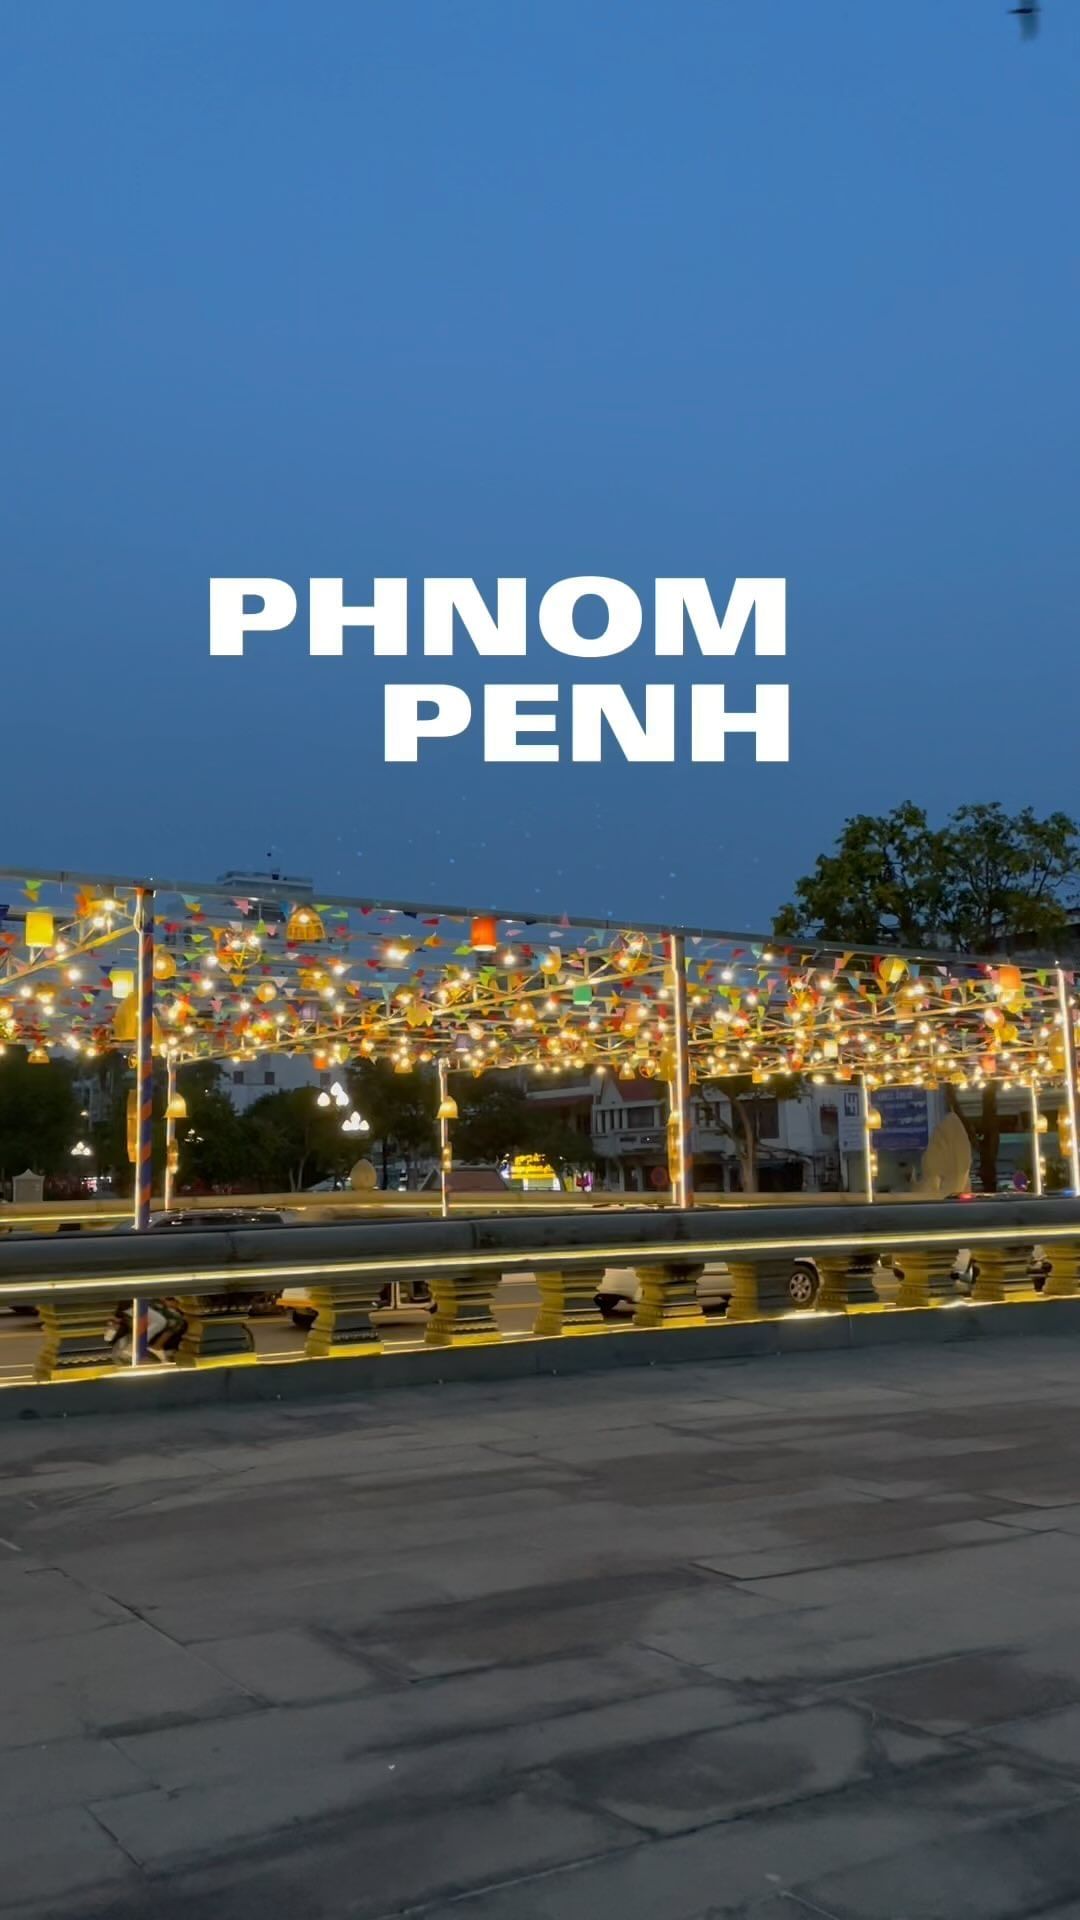 Phnom Penh's Cultural Heritage and Riverside Revelry